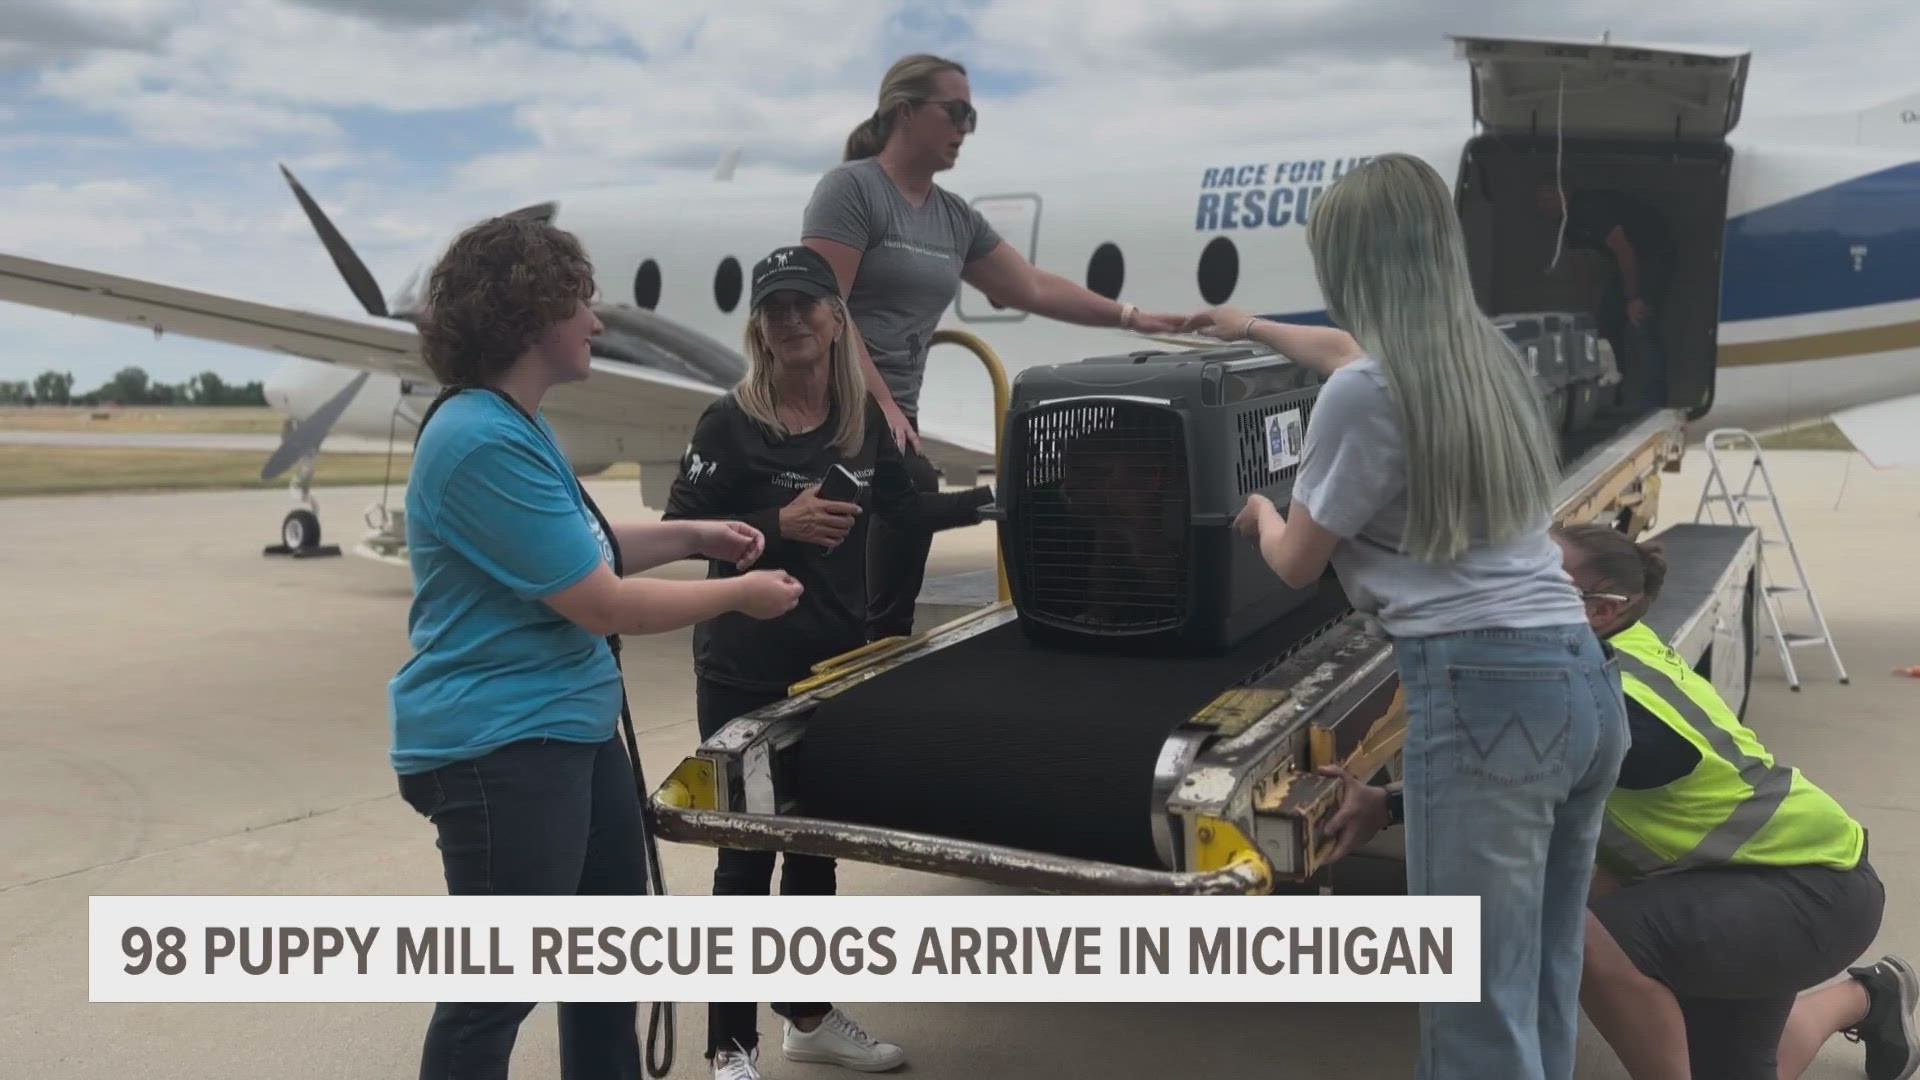 The dogs will be divided between shelters across Michigan. Many are in rough medical shape, and will need time before they are up for adoption.